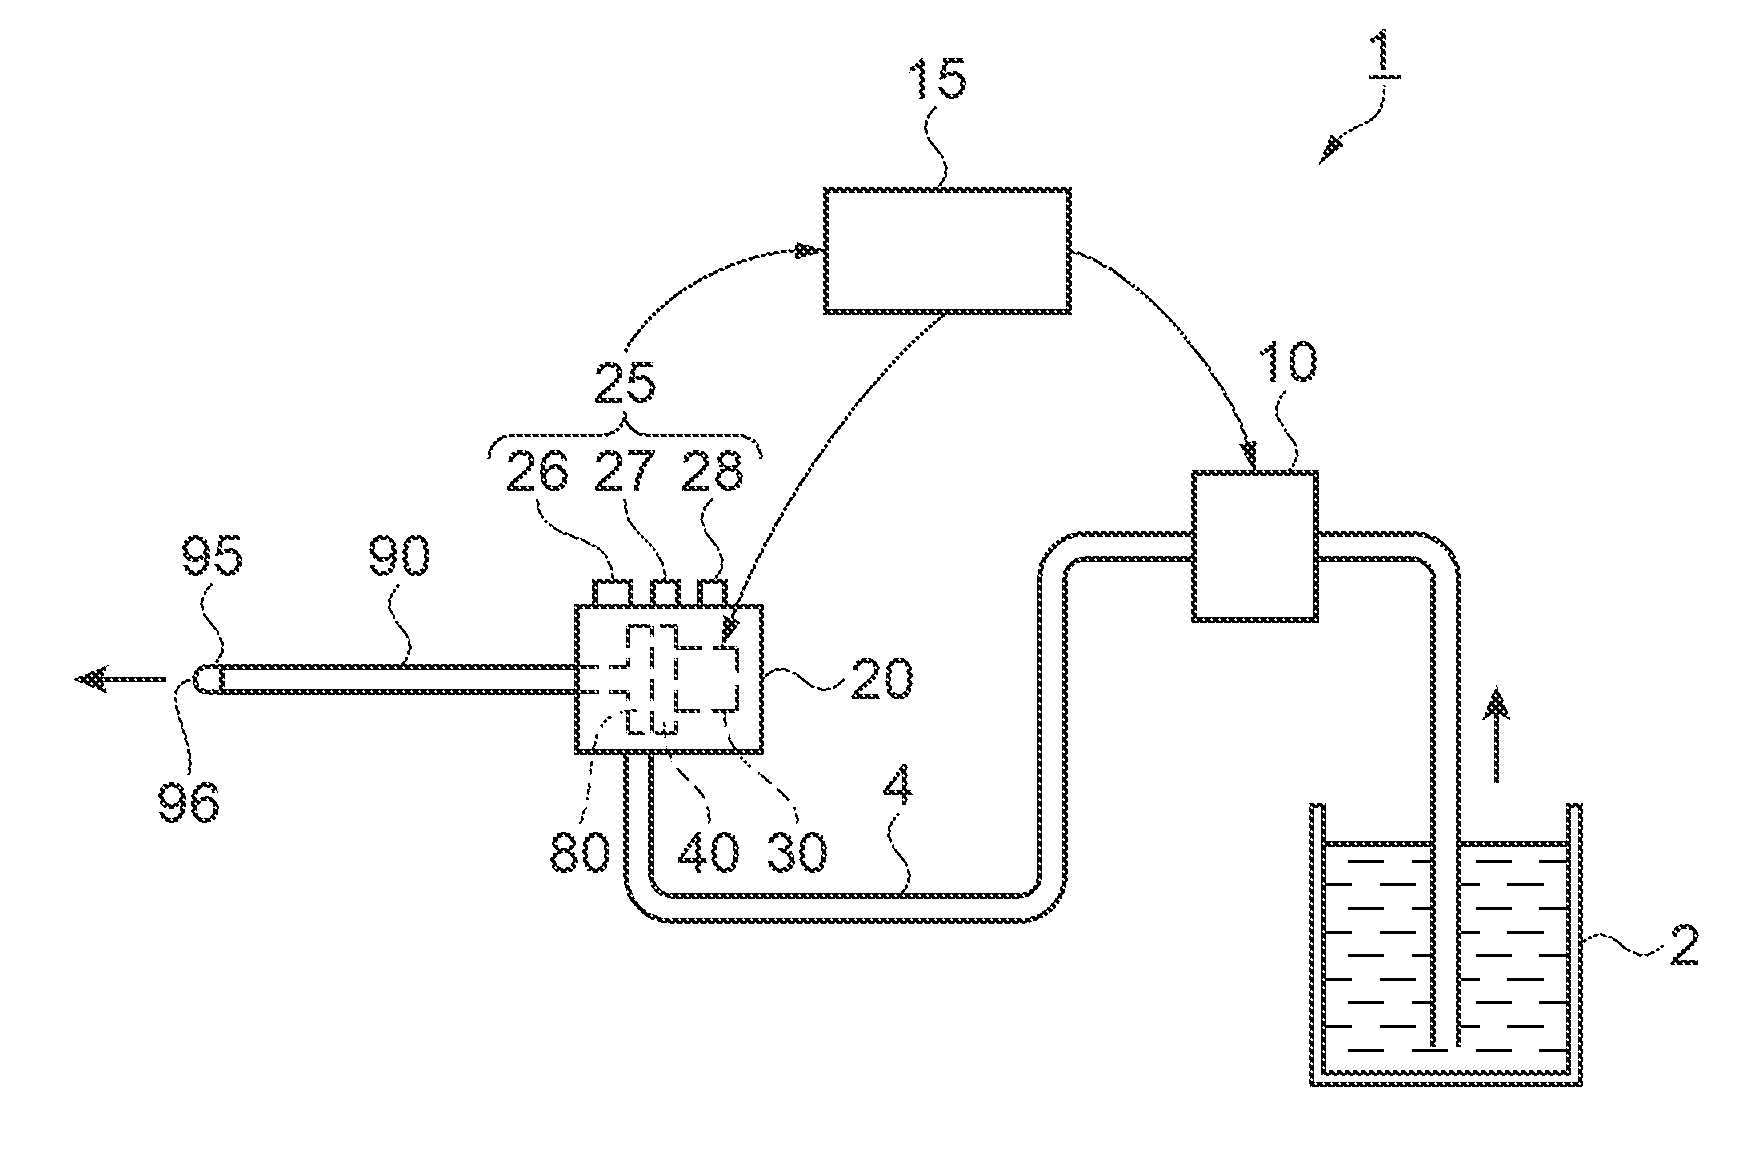 Fluid ejection method and fluid ejection device